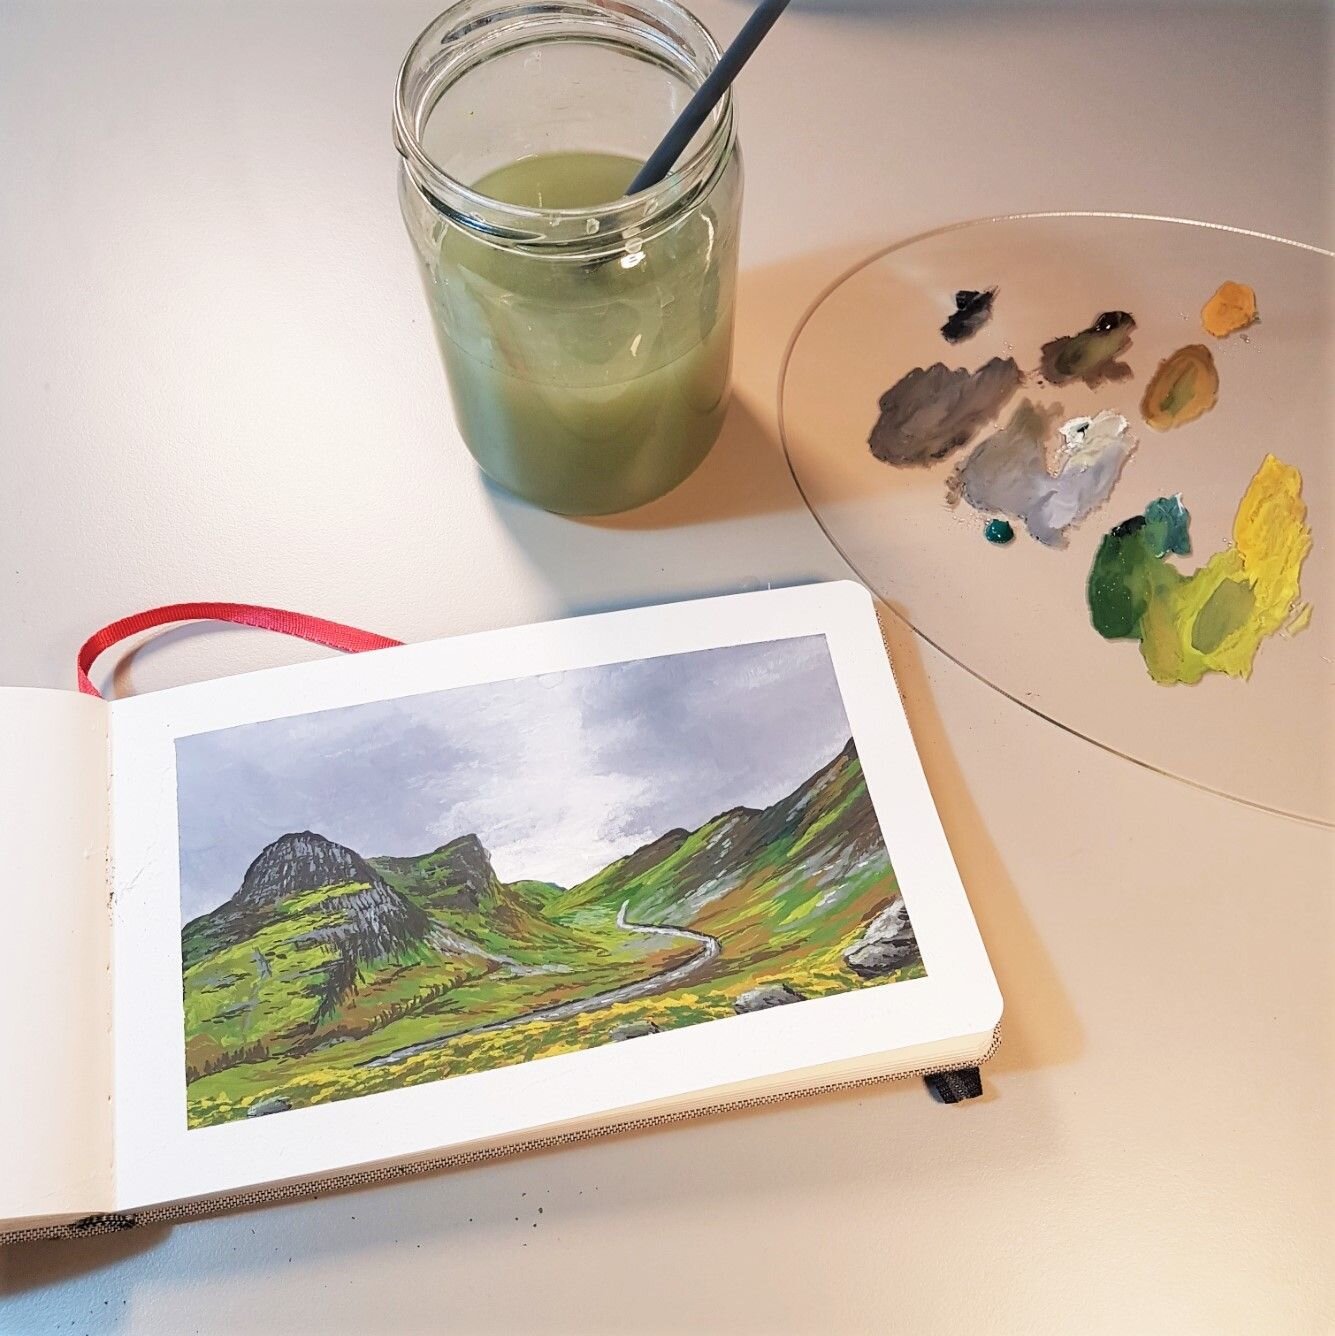 Check out my Youtube channel for a real time Paint with Me session https://buff.ly/3VmYQ1w 
 . 
 . 
 . 
#art #artist #youtube #youtubechannel #paint #painting #gouache #gouachepainting #landscape #landscapepainting #siketchbook #artjournal #mountains